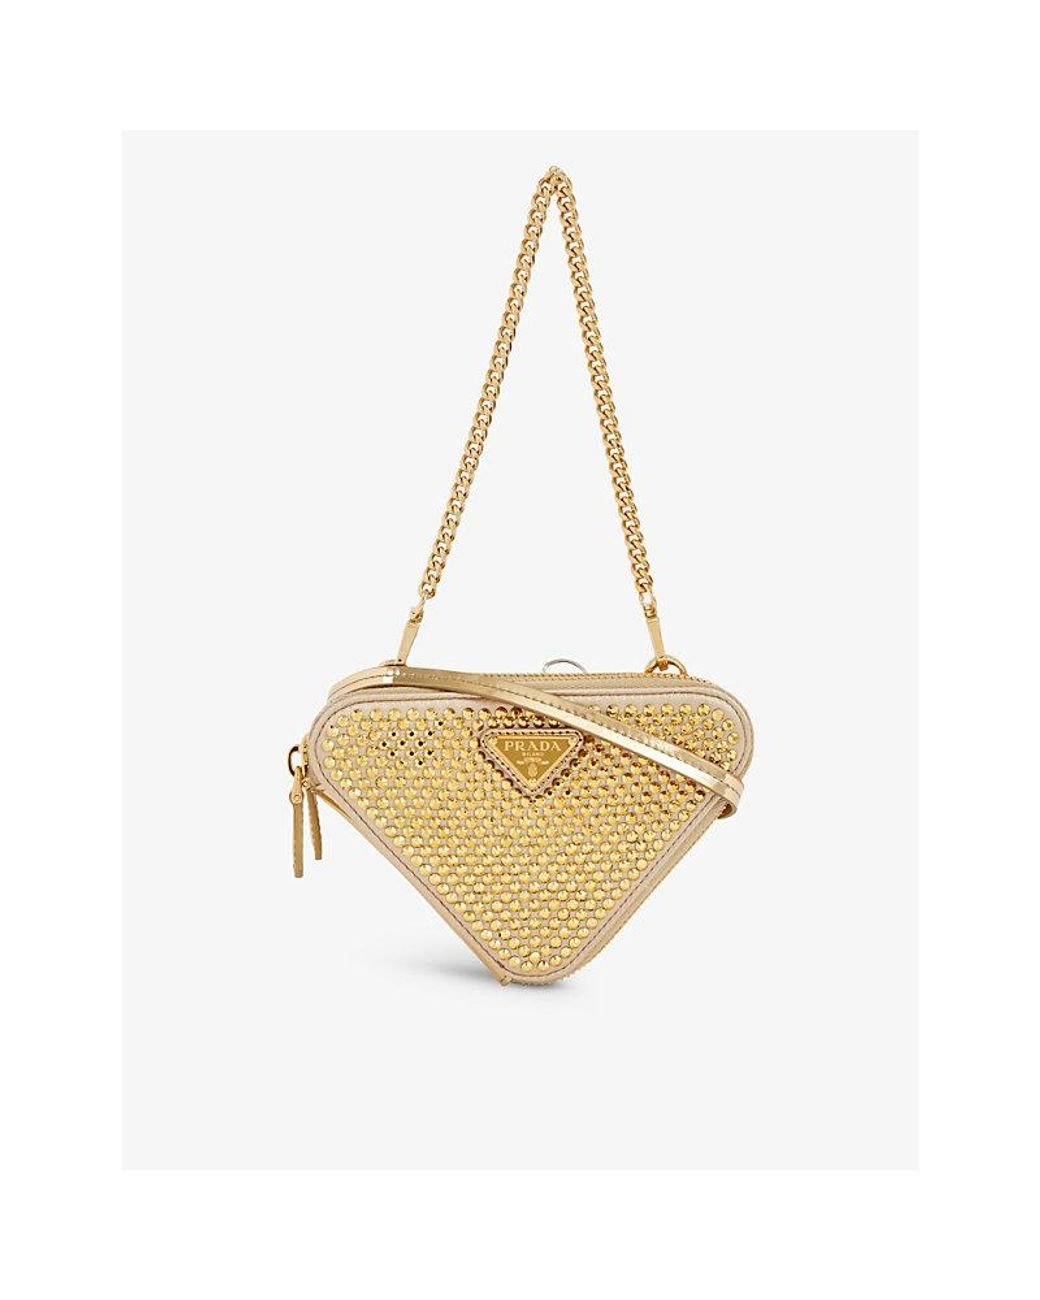 Prada Triangle Pouch Crystal Embellished Satin Gold